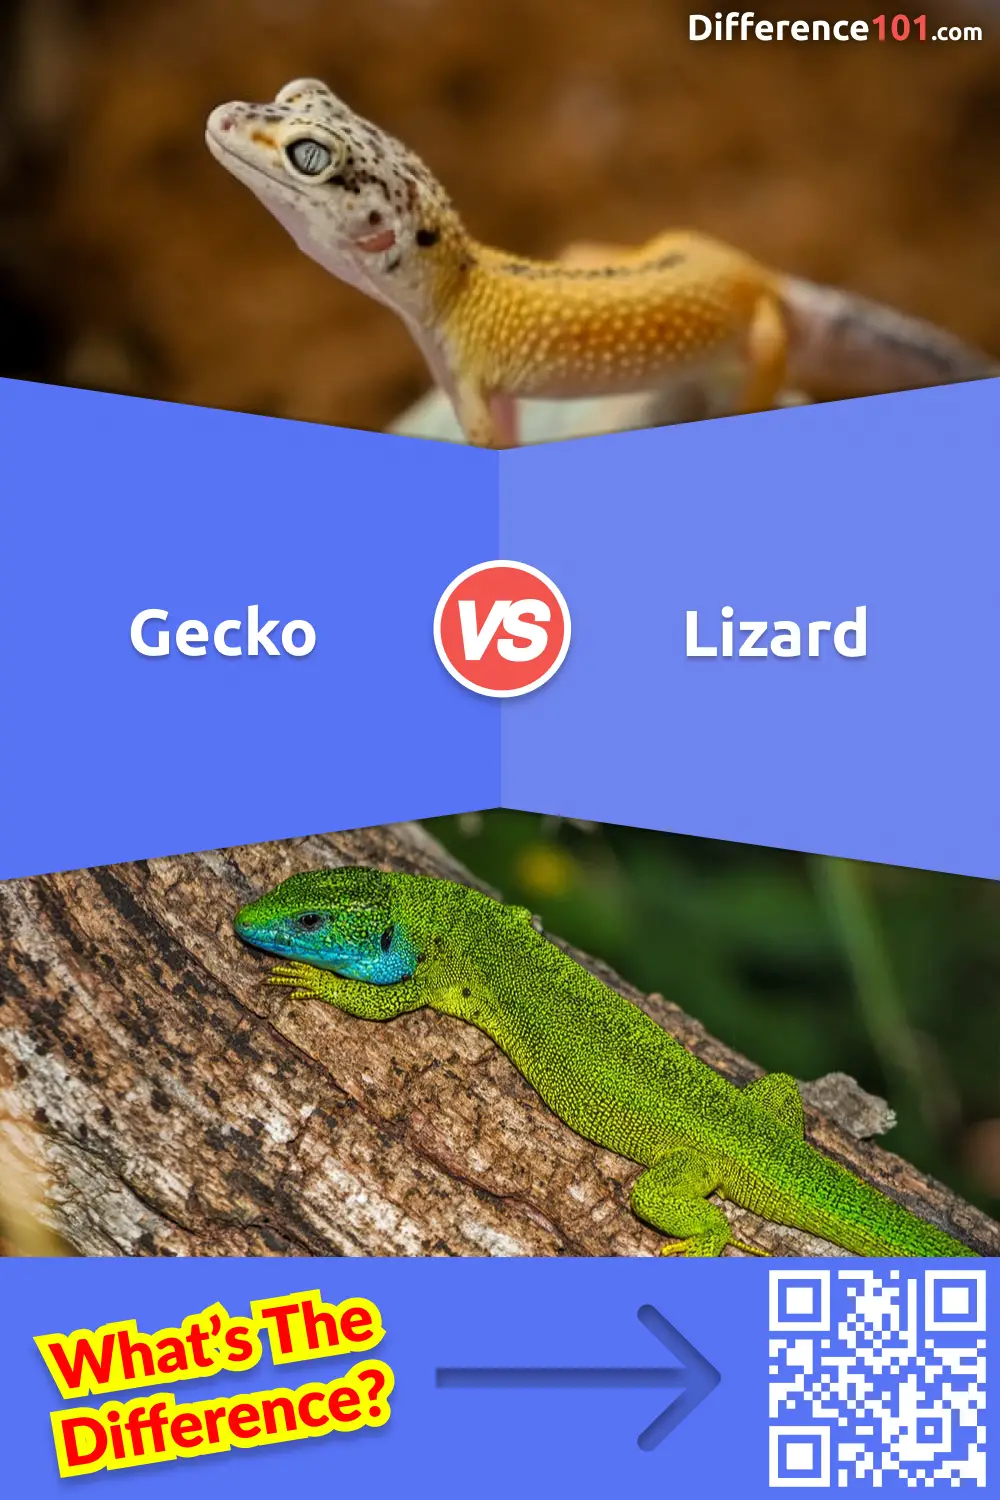 Whats the Difference Between a Gecko and a Lizard?